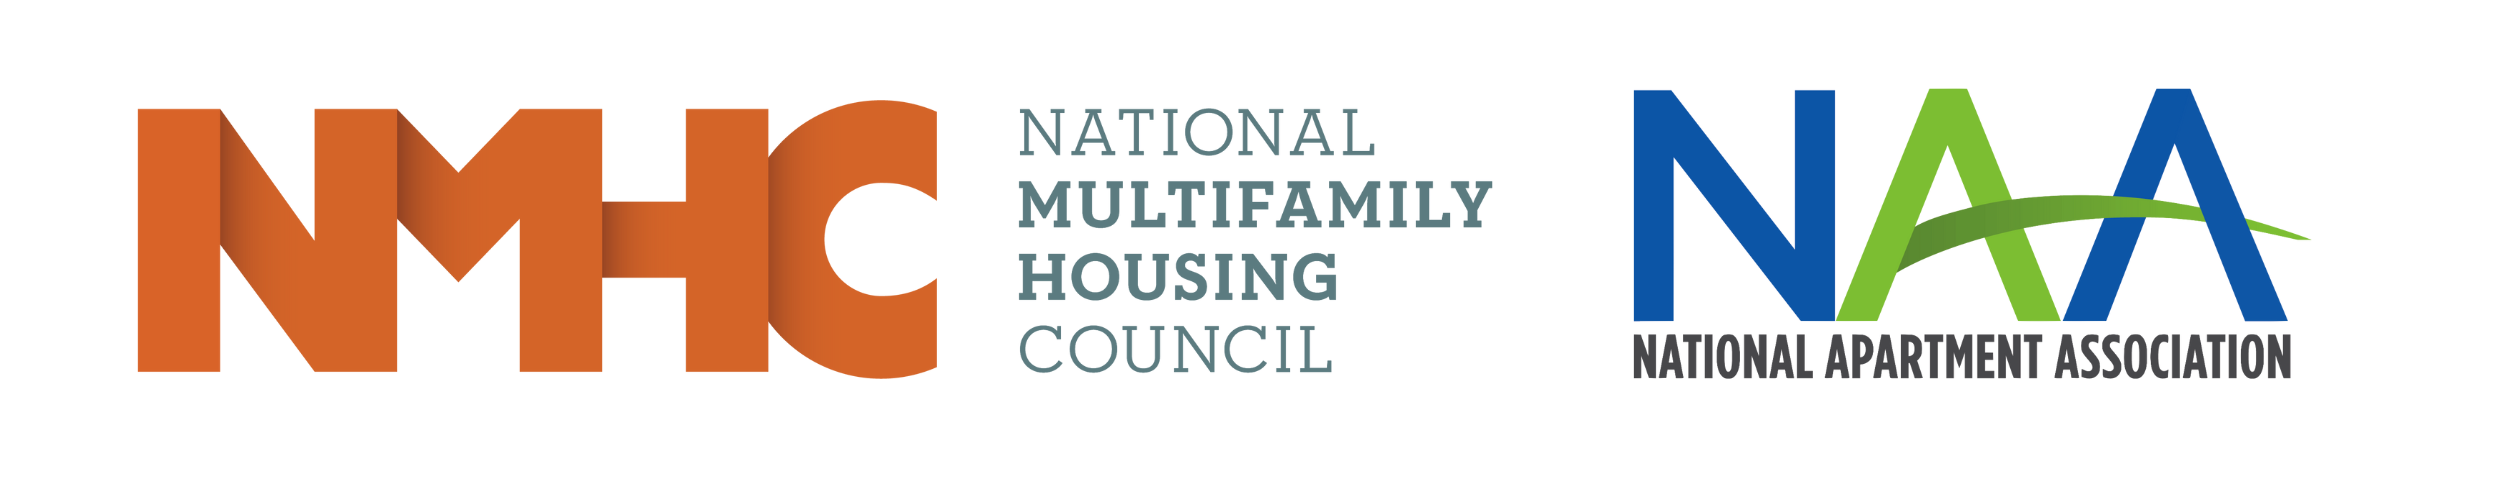 naa and nmhc logos